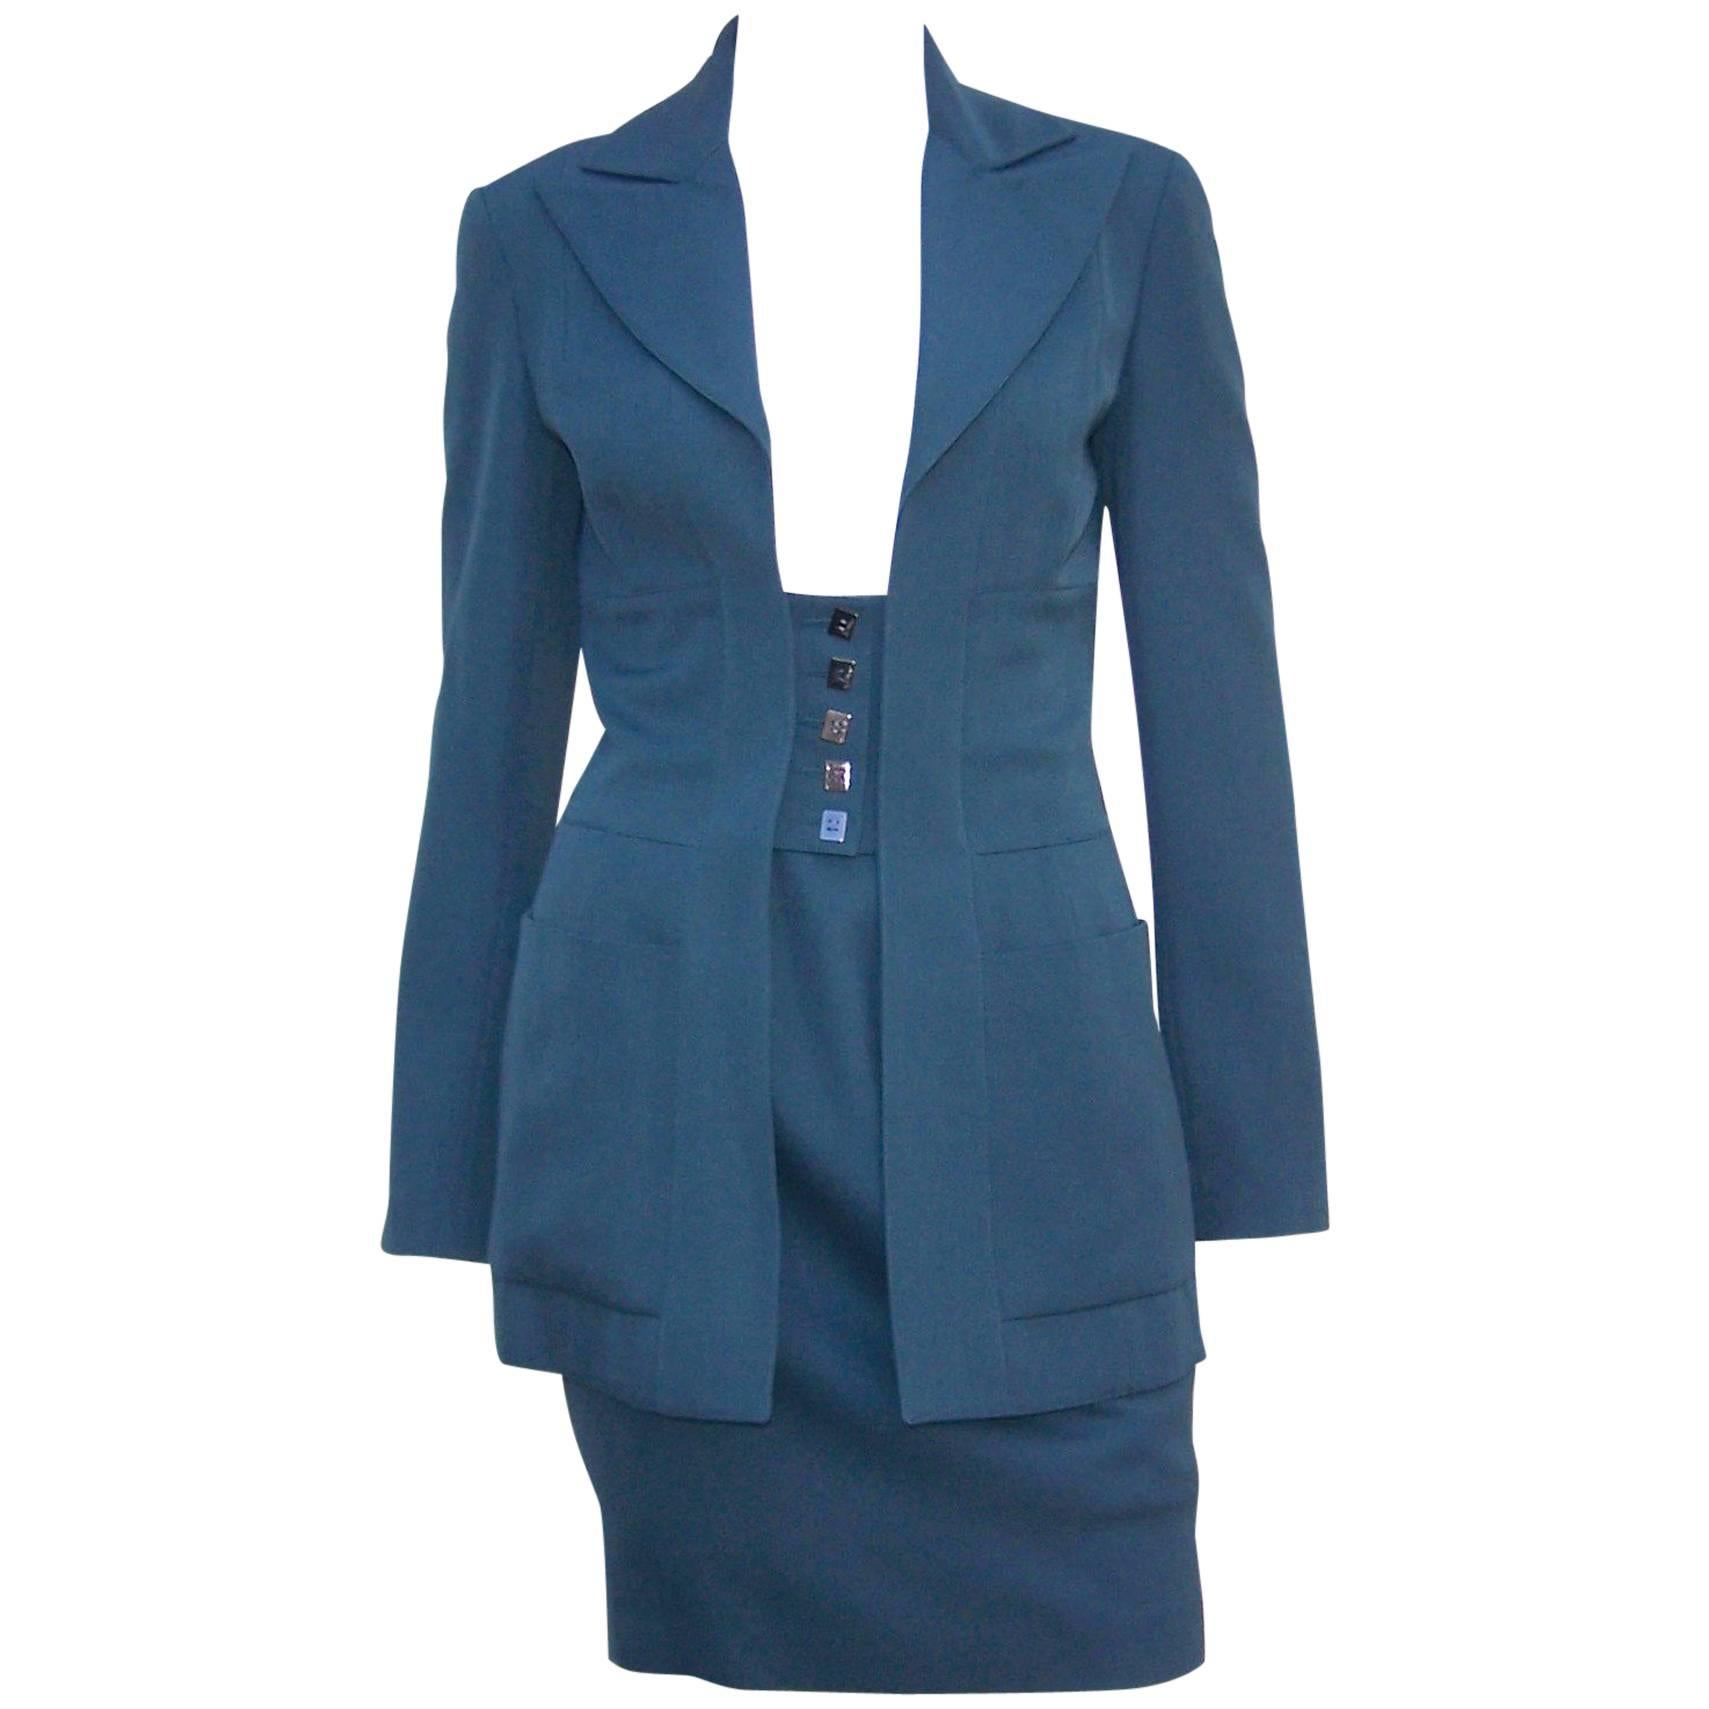 Karl Lagerfeld Corset Style Teal Green Suit, 1990's For Sale